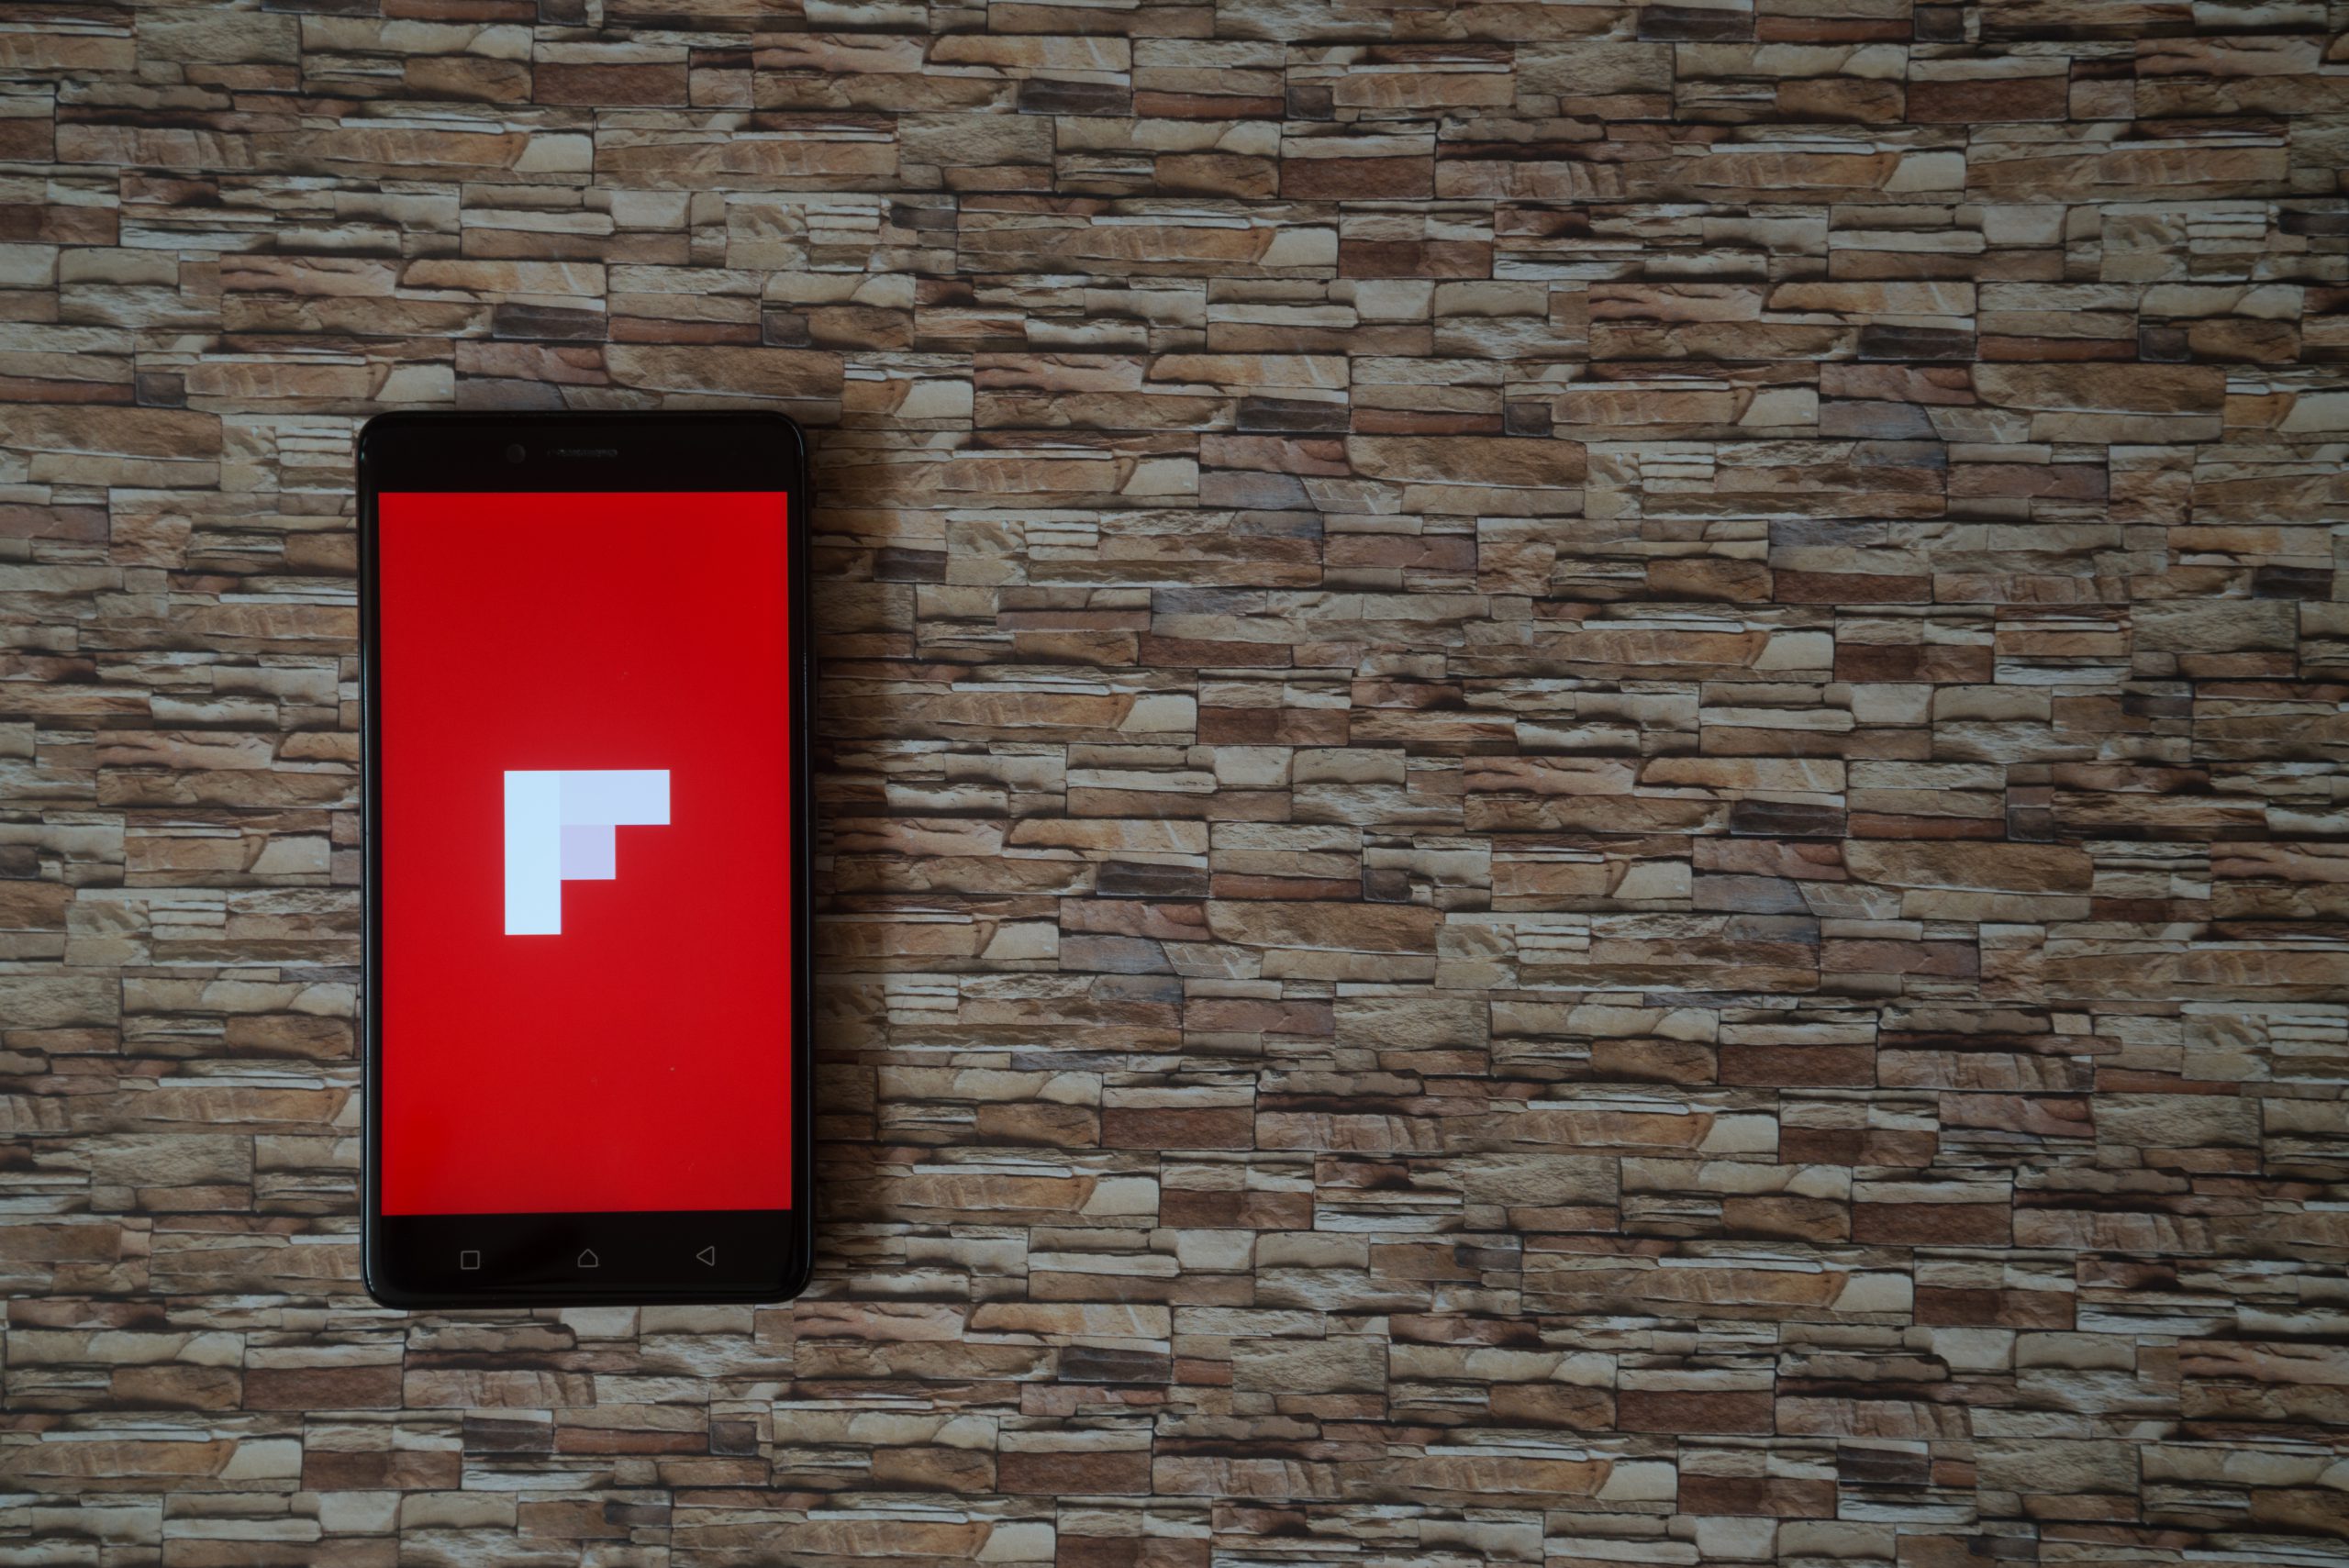 Our Favorite App of the Month: Flipboard!